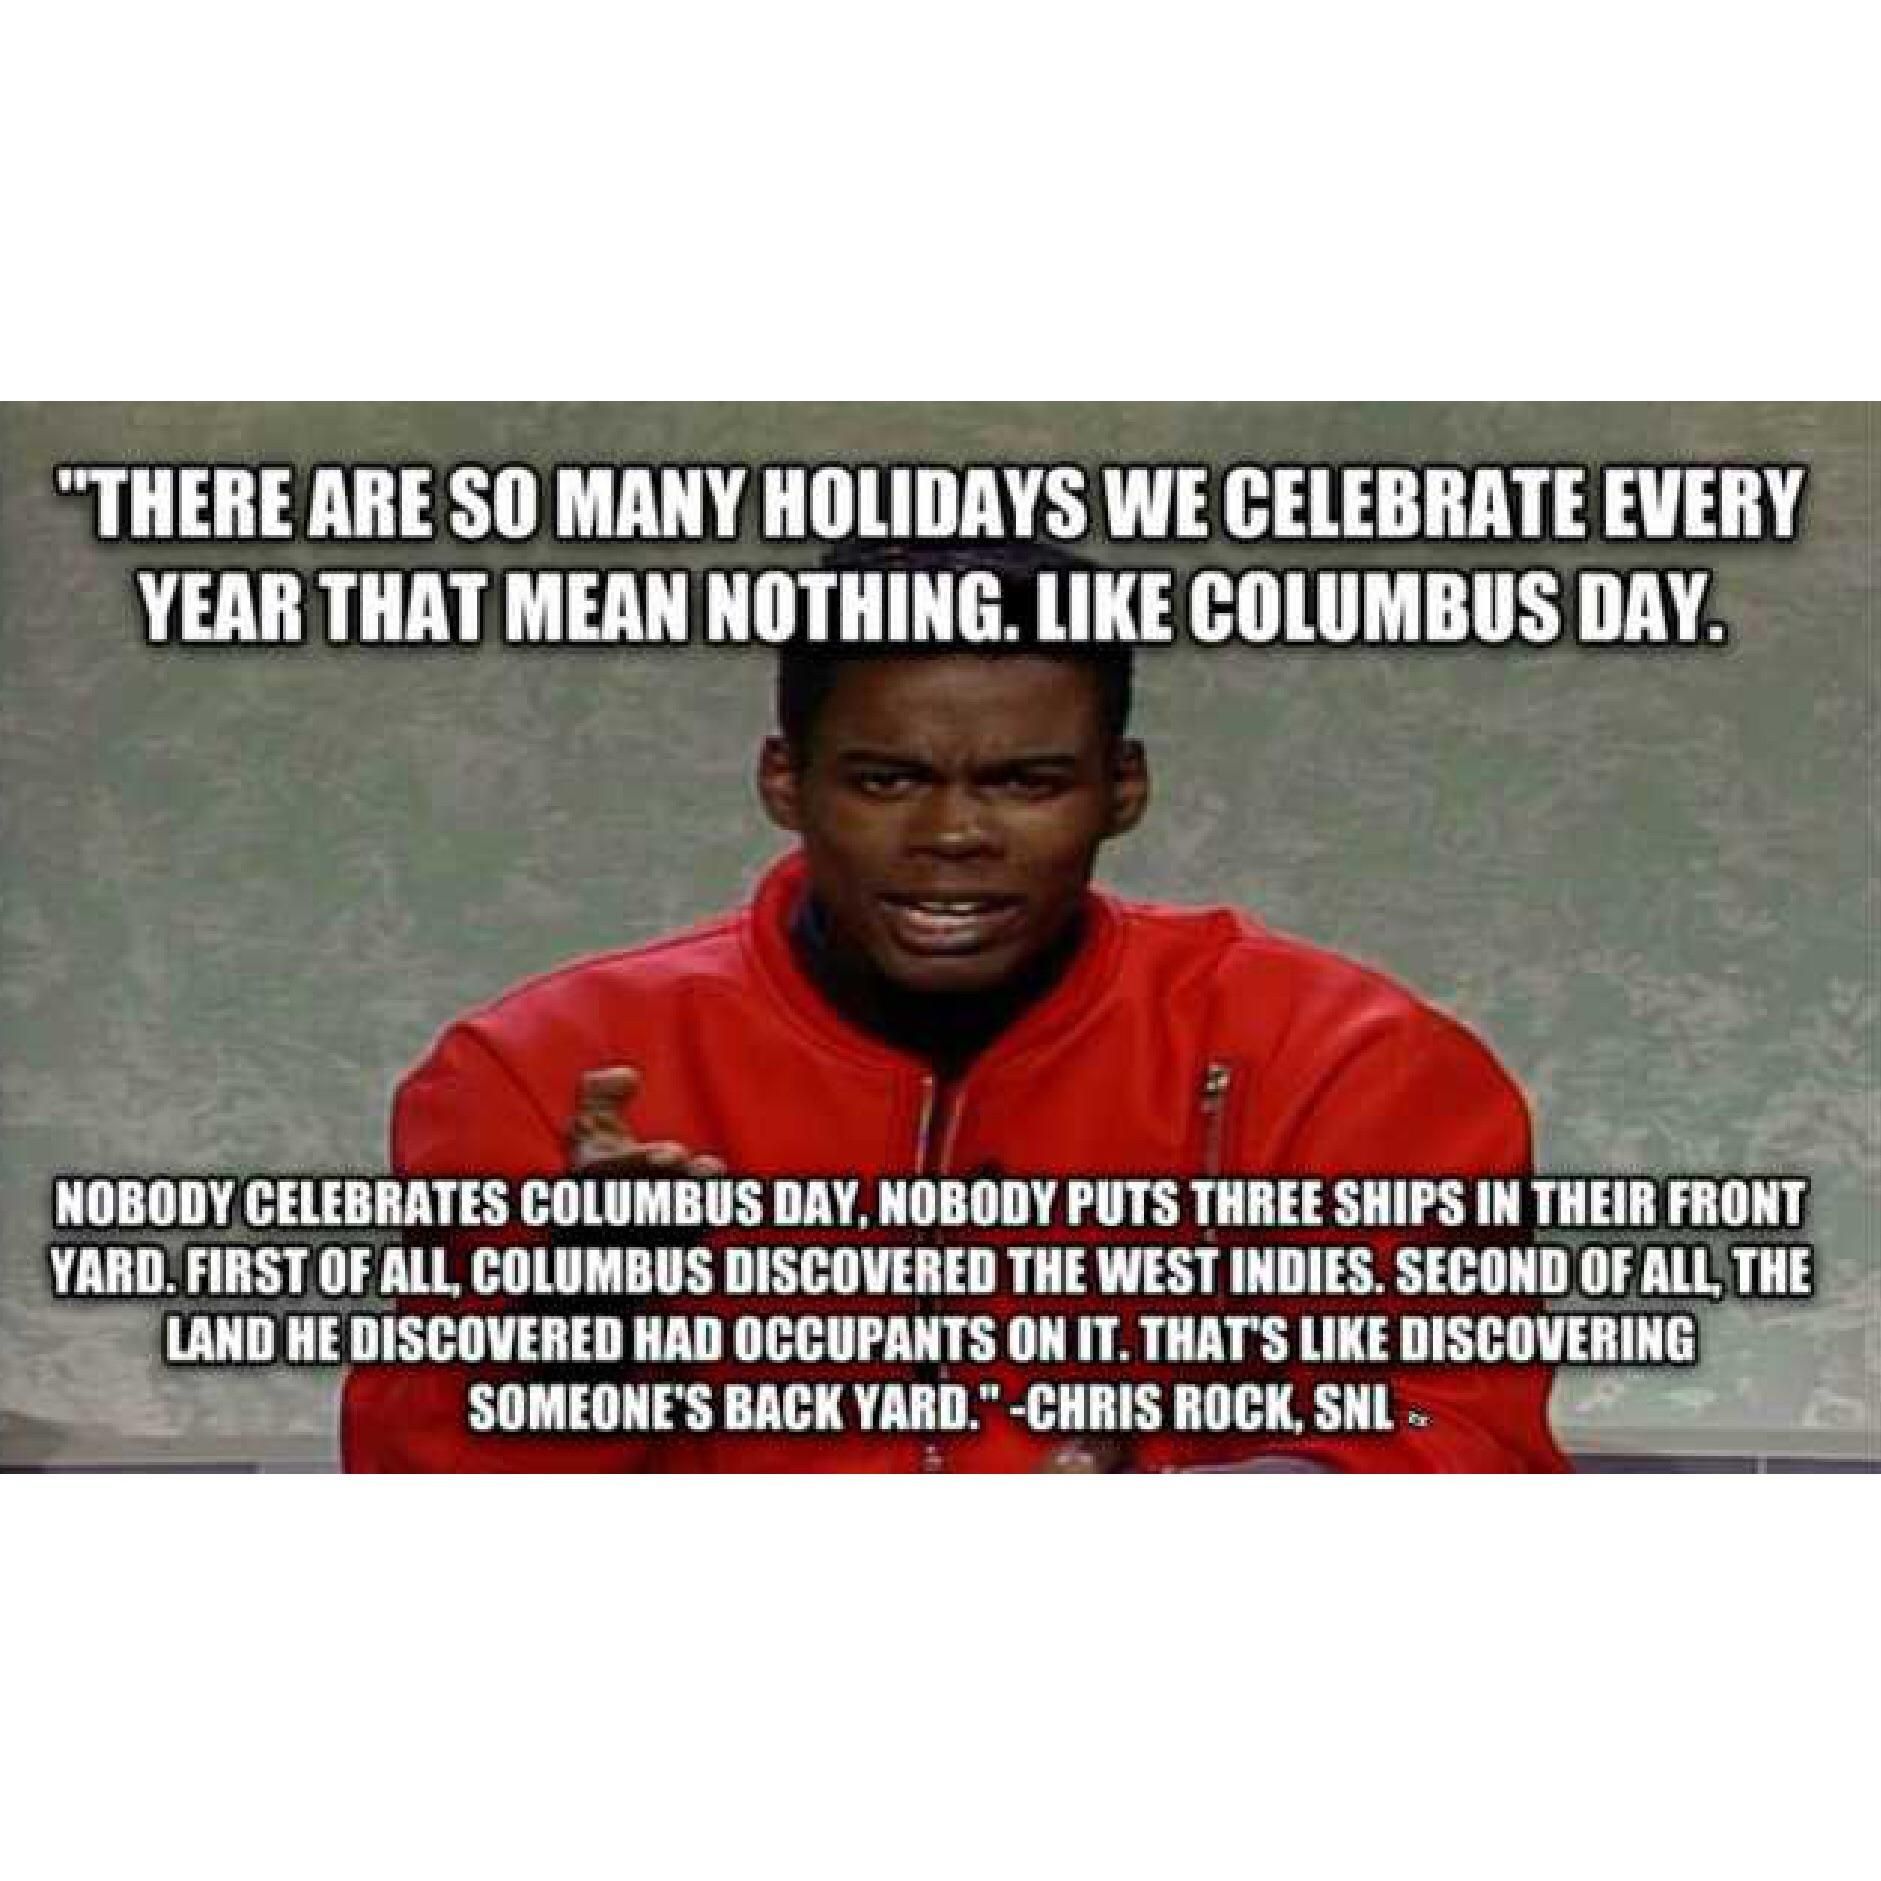 Chris Rock’s thoughts on “Columbus Day”